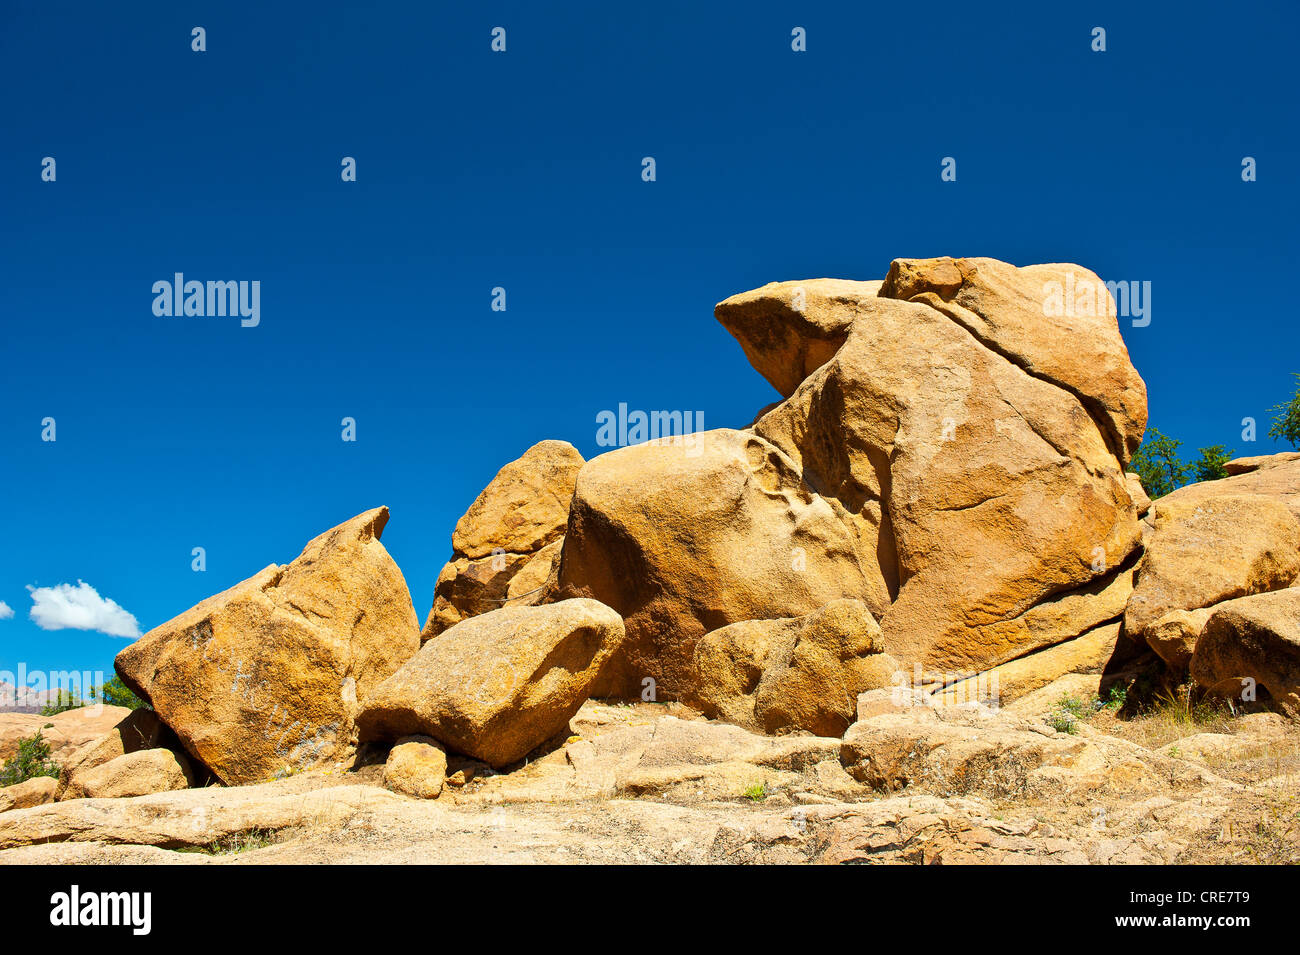 Granite boulders lying on a rocky outcrop in the Anti-Atlas Mountains, southern Morocco, Morocco, Africa Stock Photo